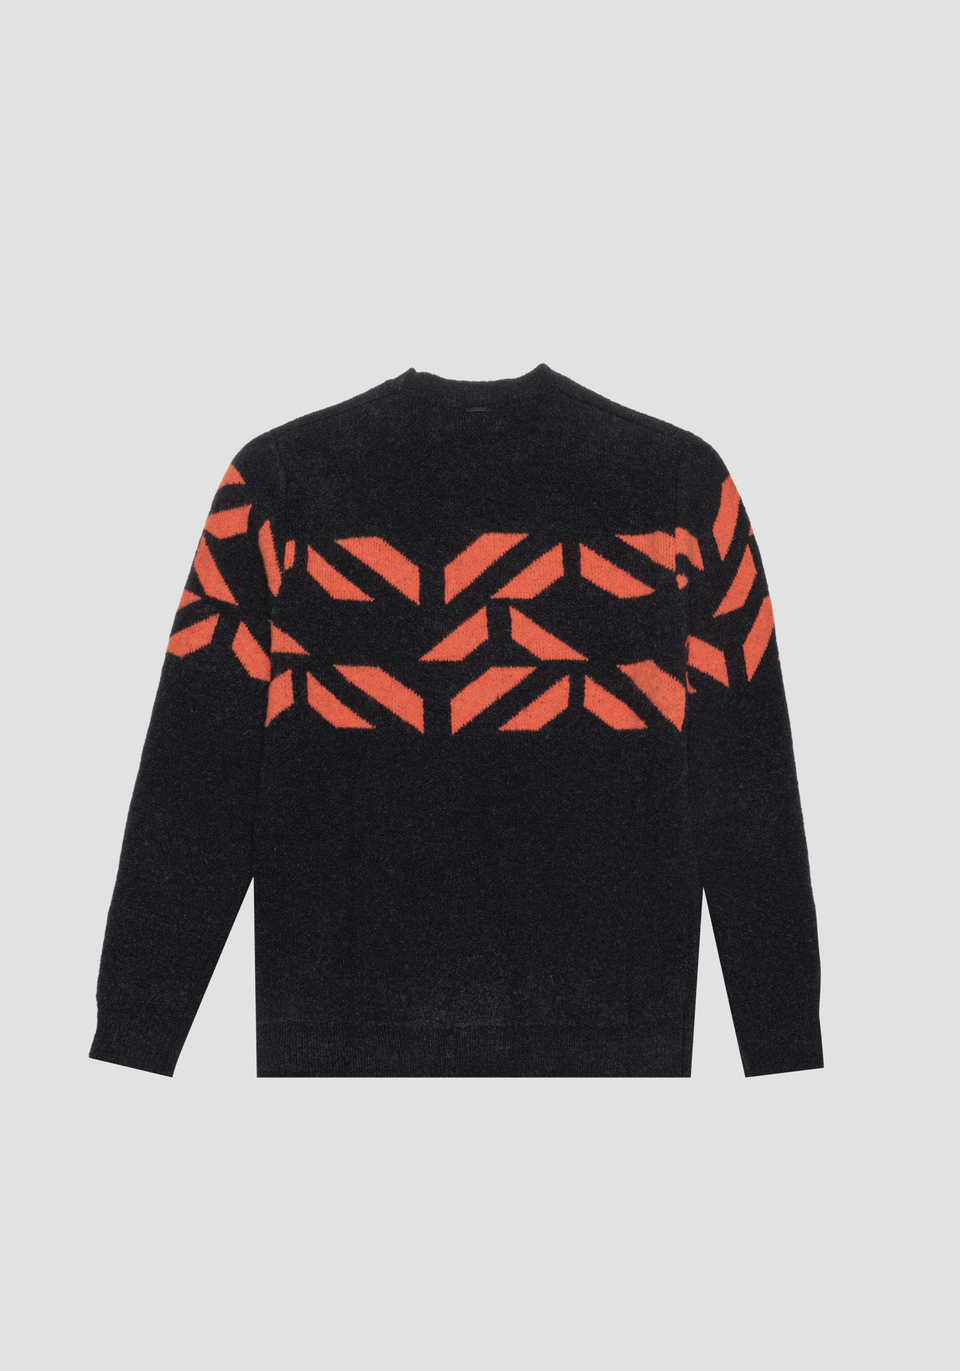 REGULAR FIT SWEATER IN MOHAIR BLEND YARN WITH JACQUARD PATTERN - Antony Morato Online Shop